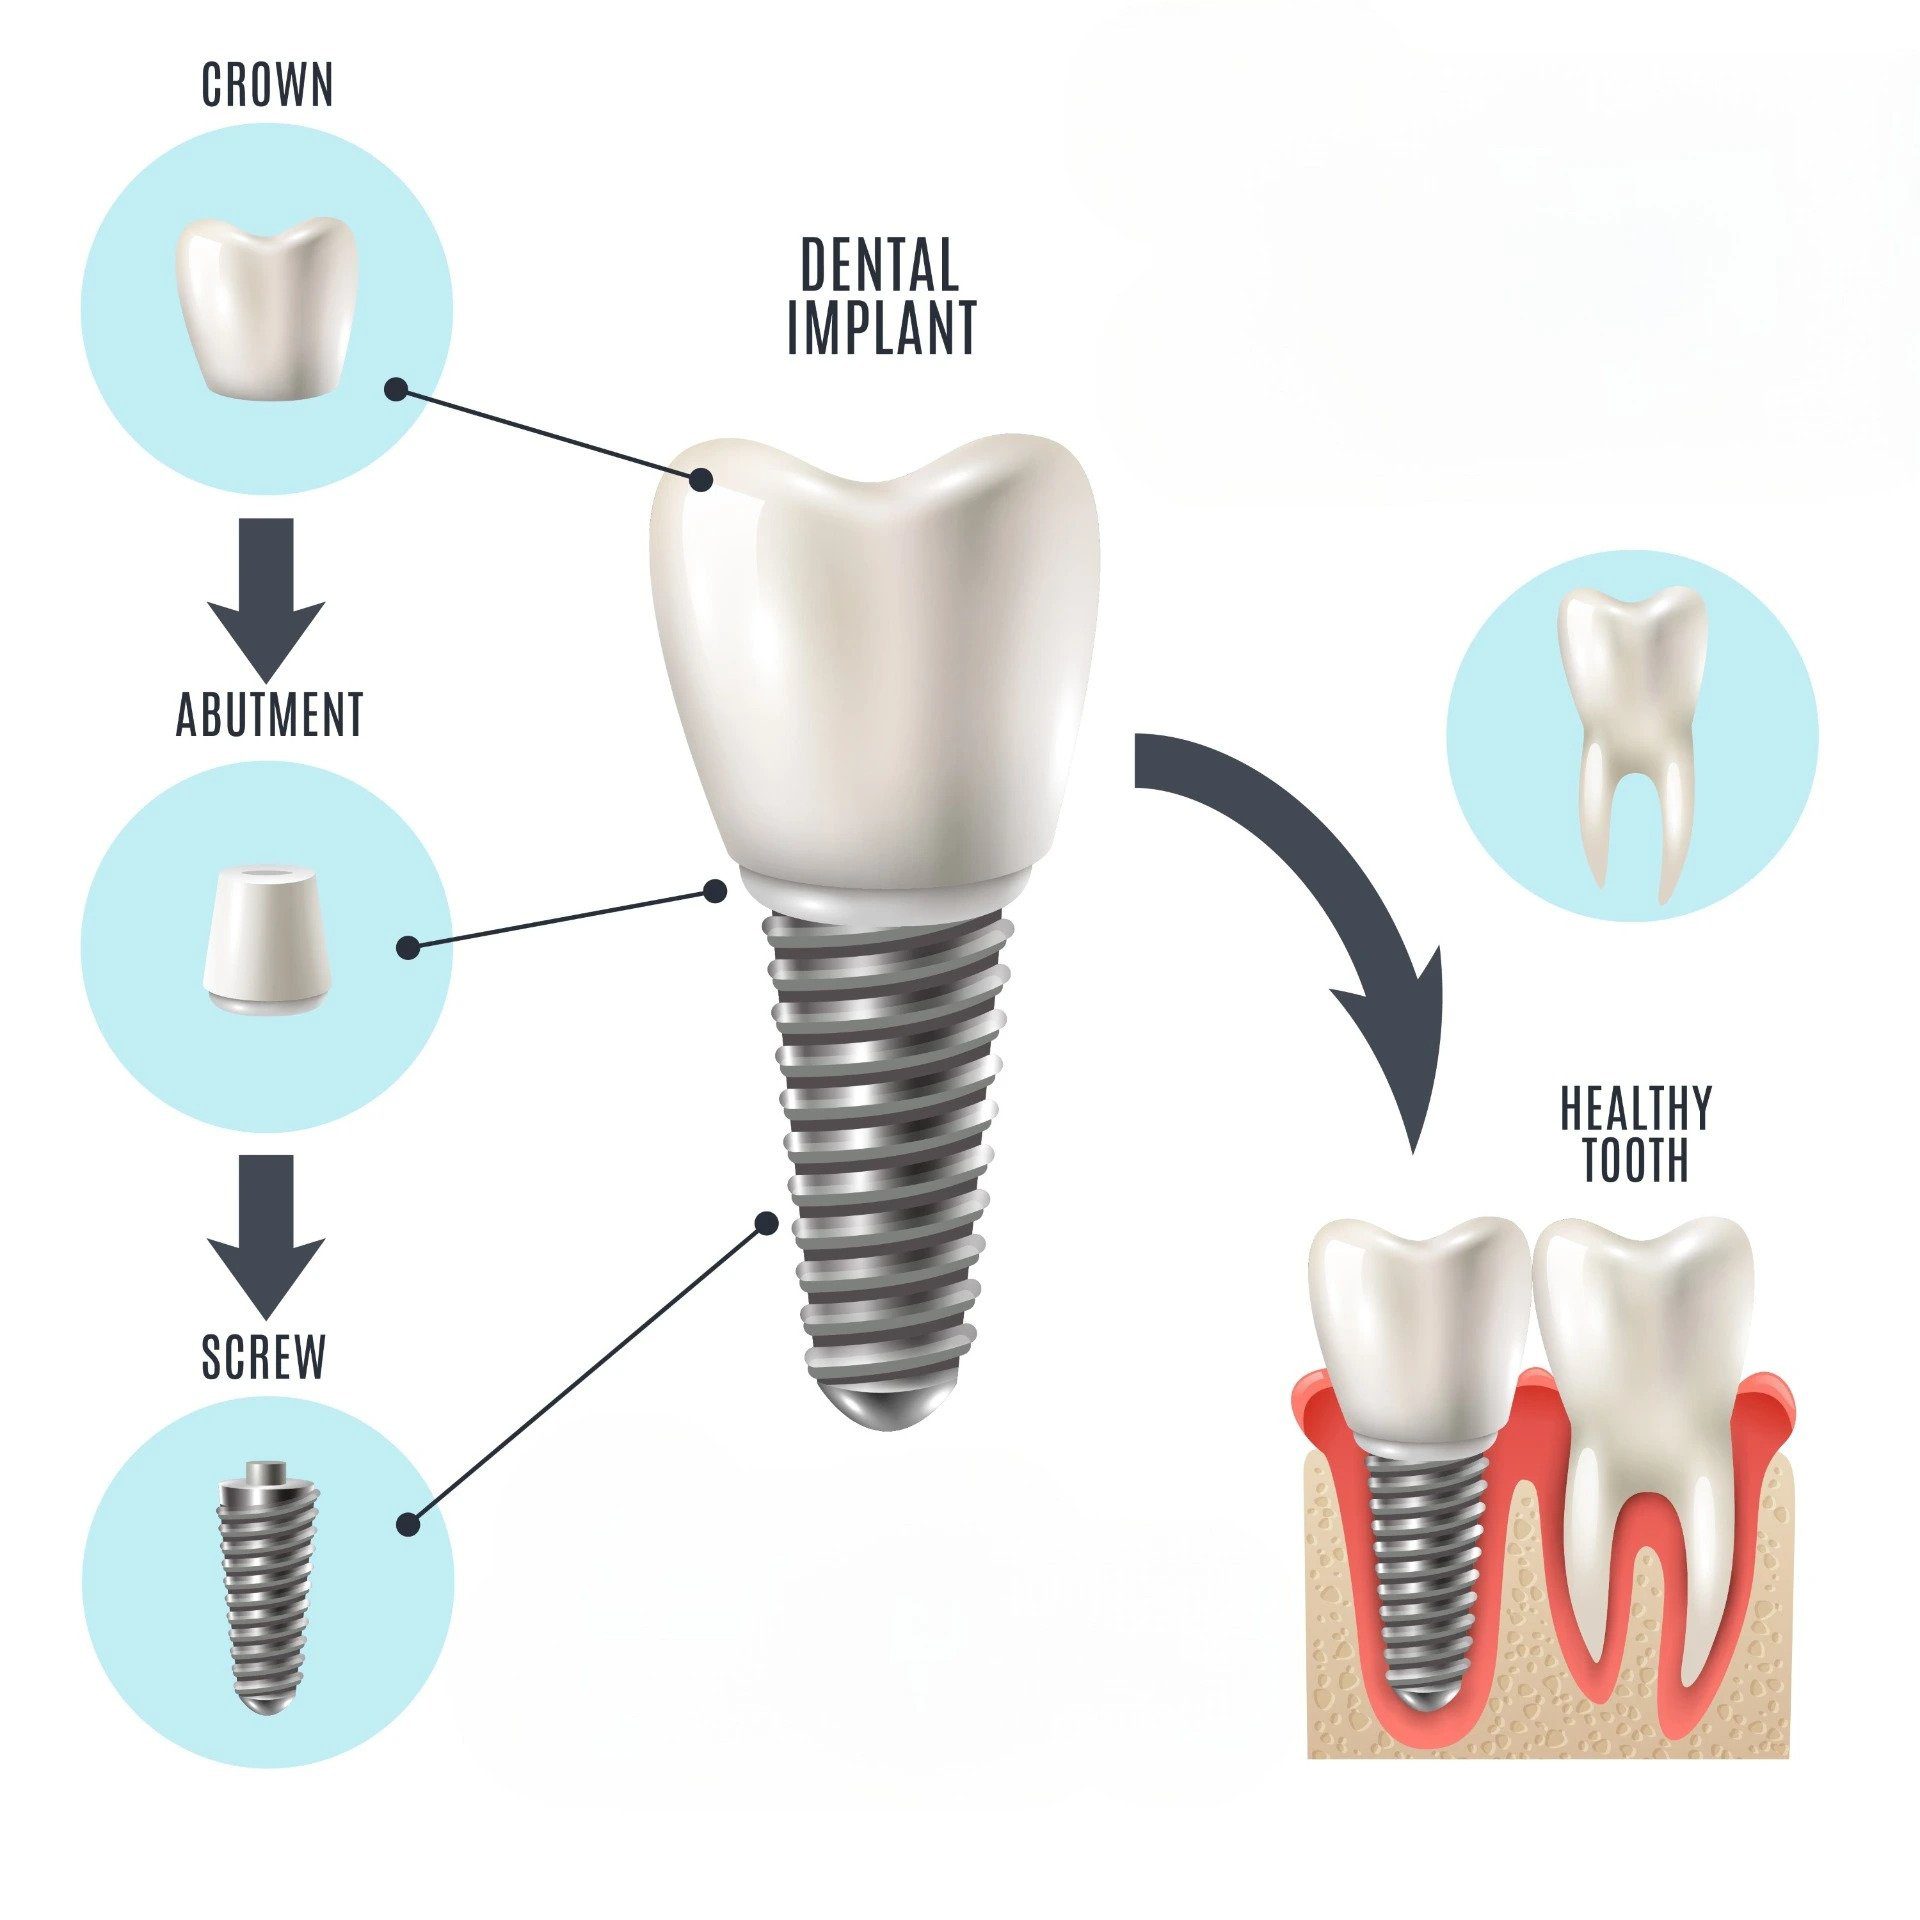 A dental implant is made of three parts: The crown, the abutment, and the screw.